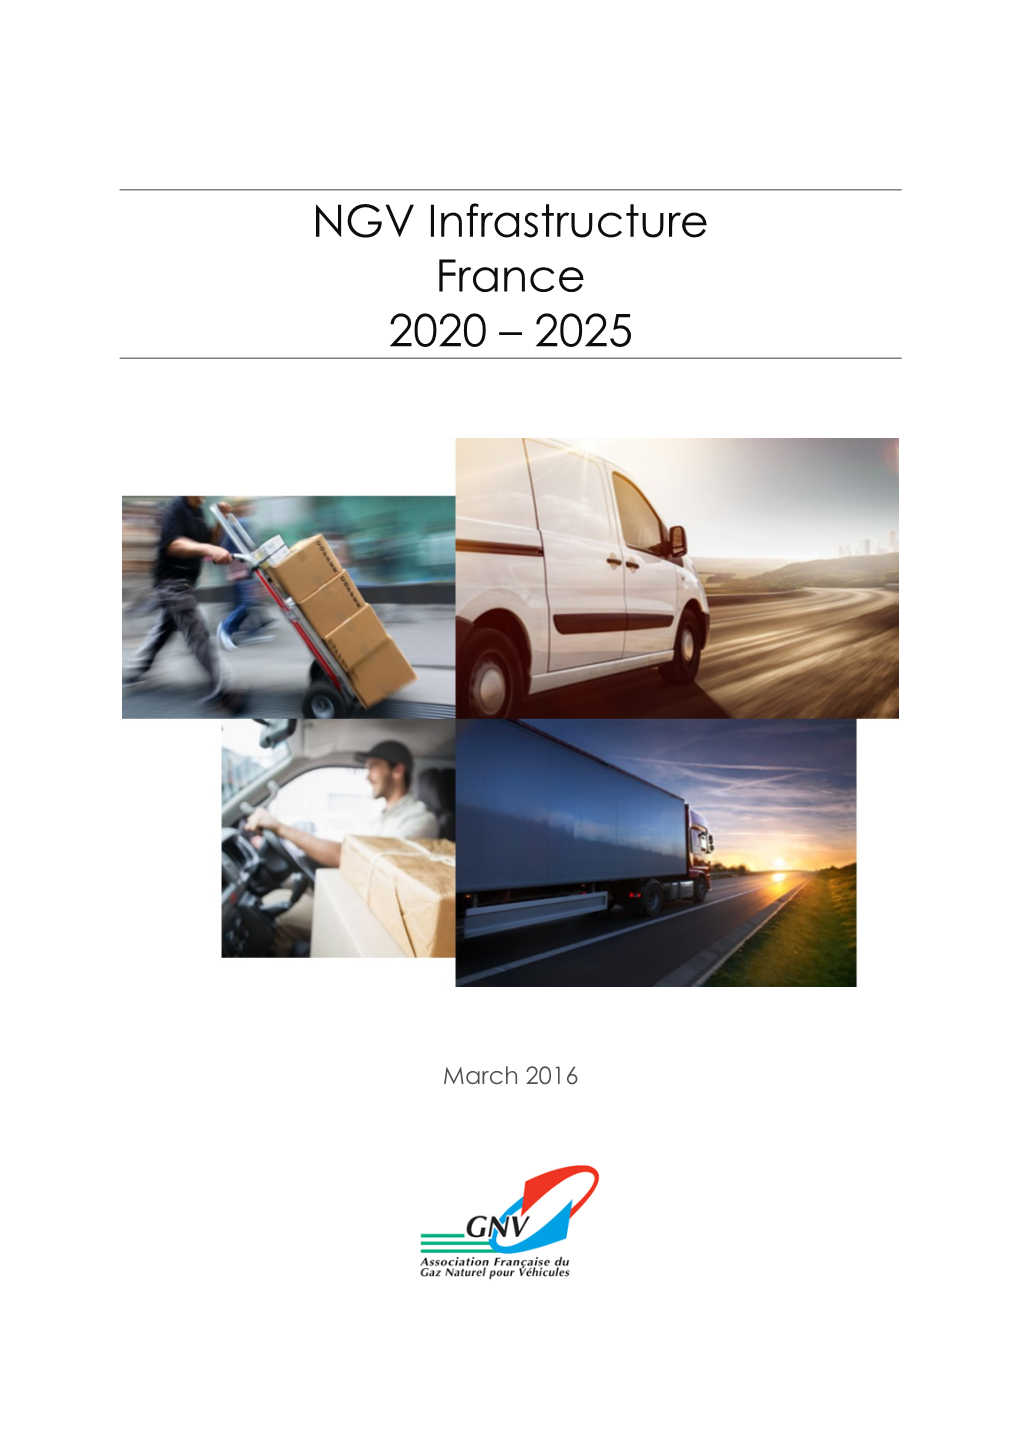 NGV Infrastructure France 2020 – 2025